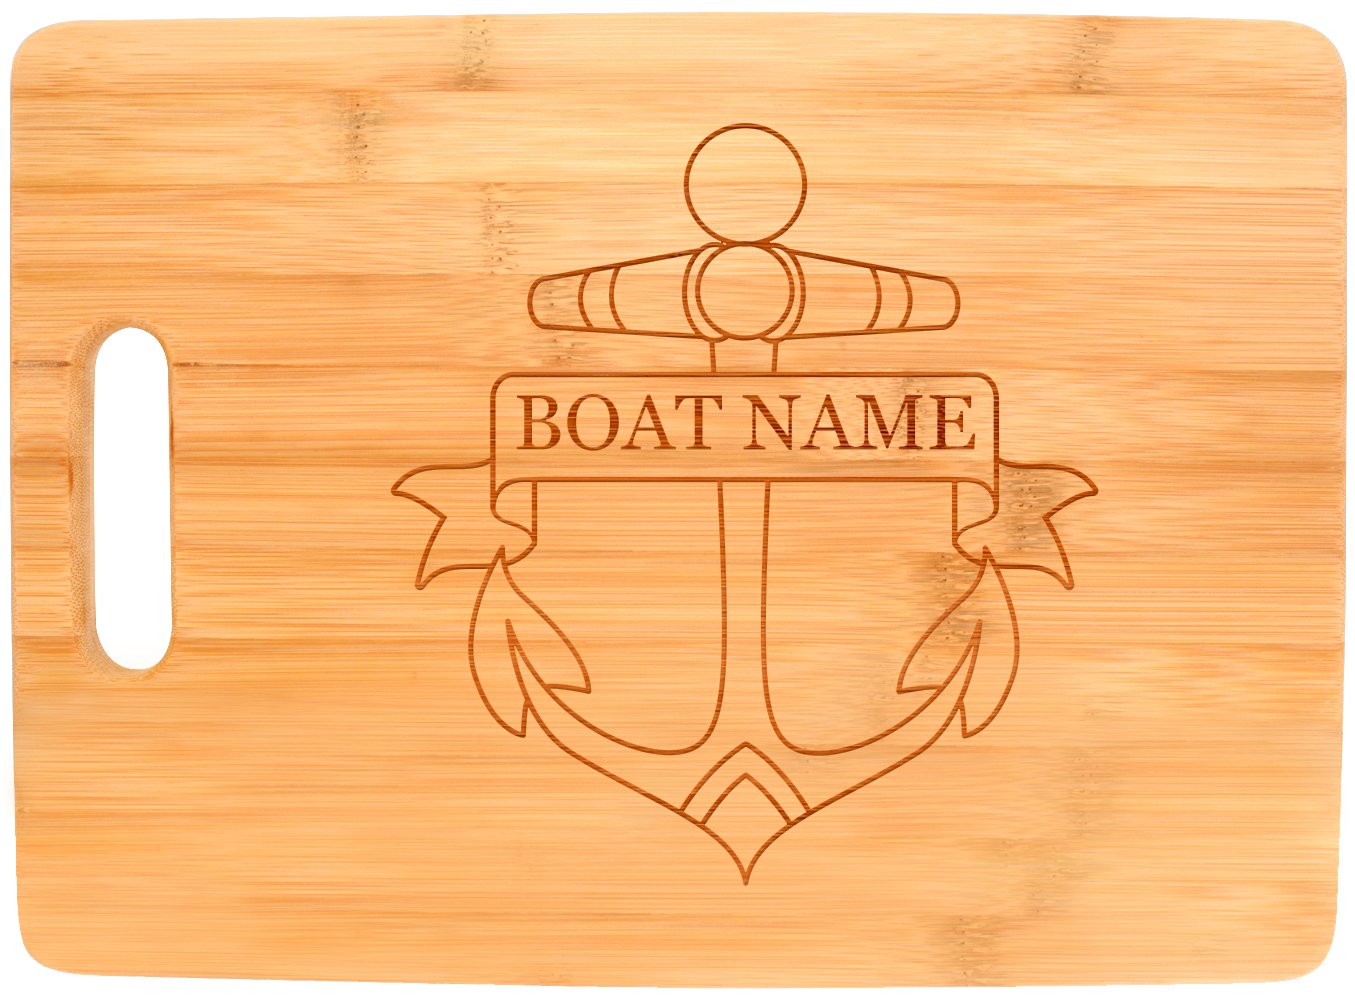 Customized Boating Gift Nautical Boat Name Anchor Personalized Decorative Wood Cutting Board Rectangle